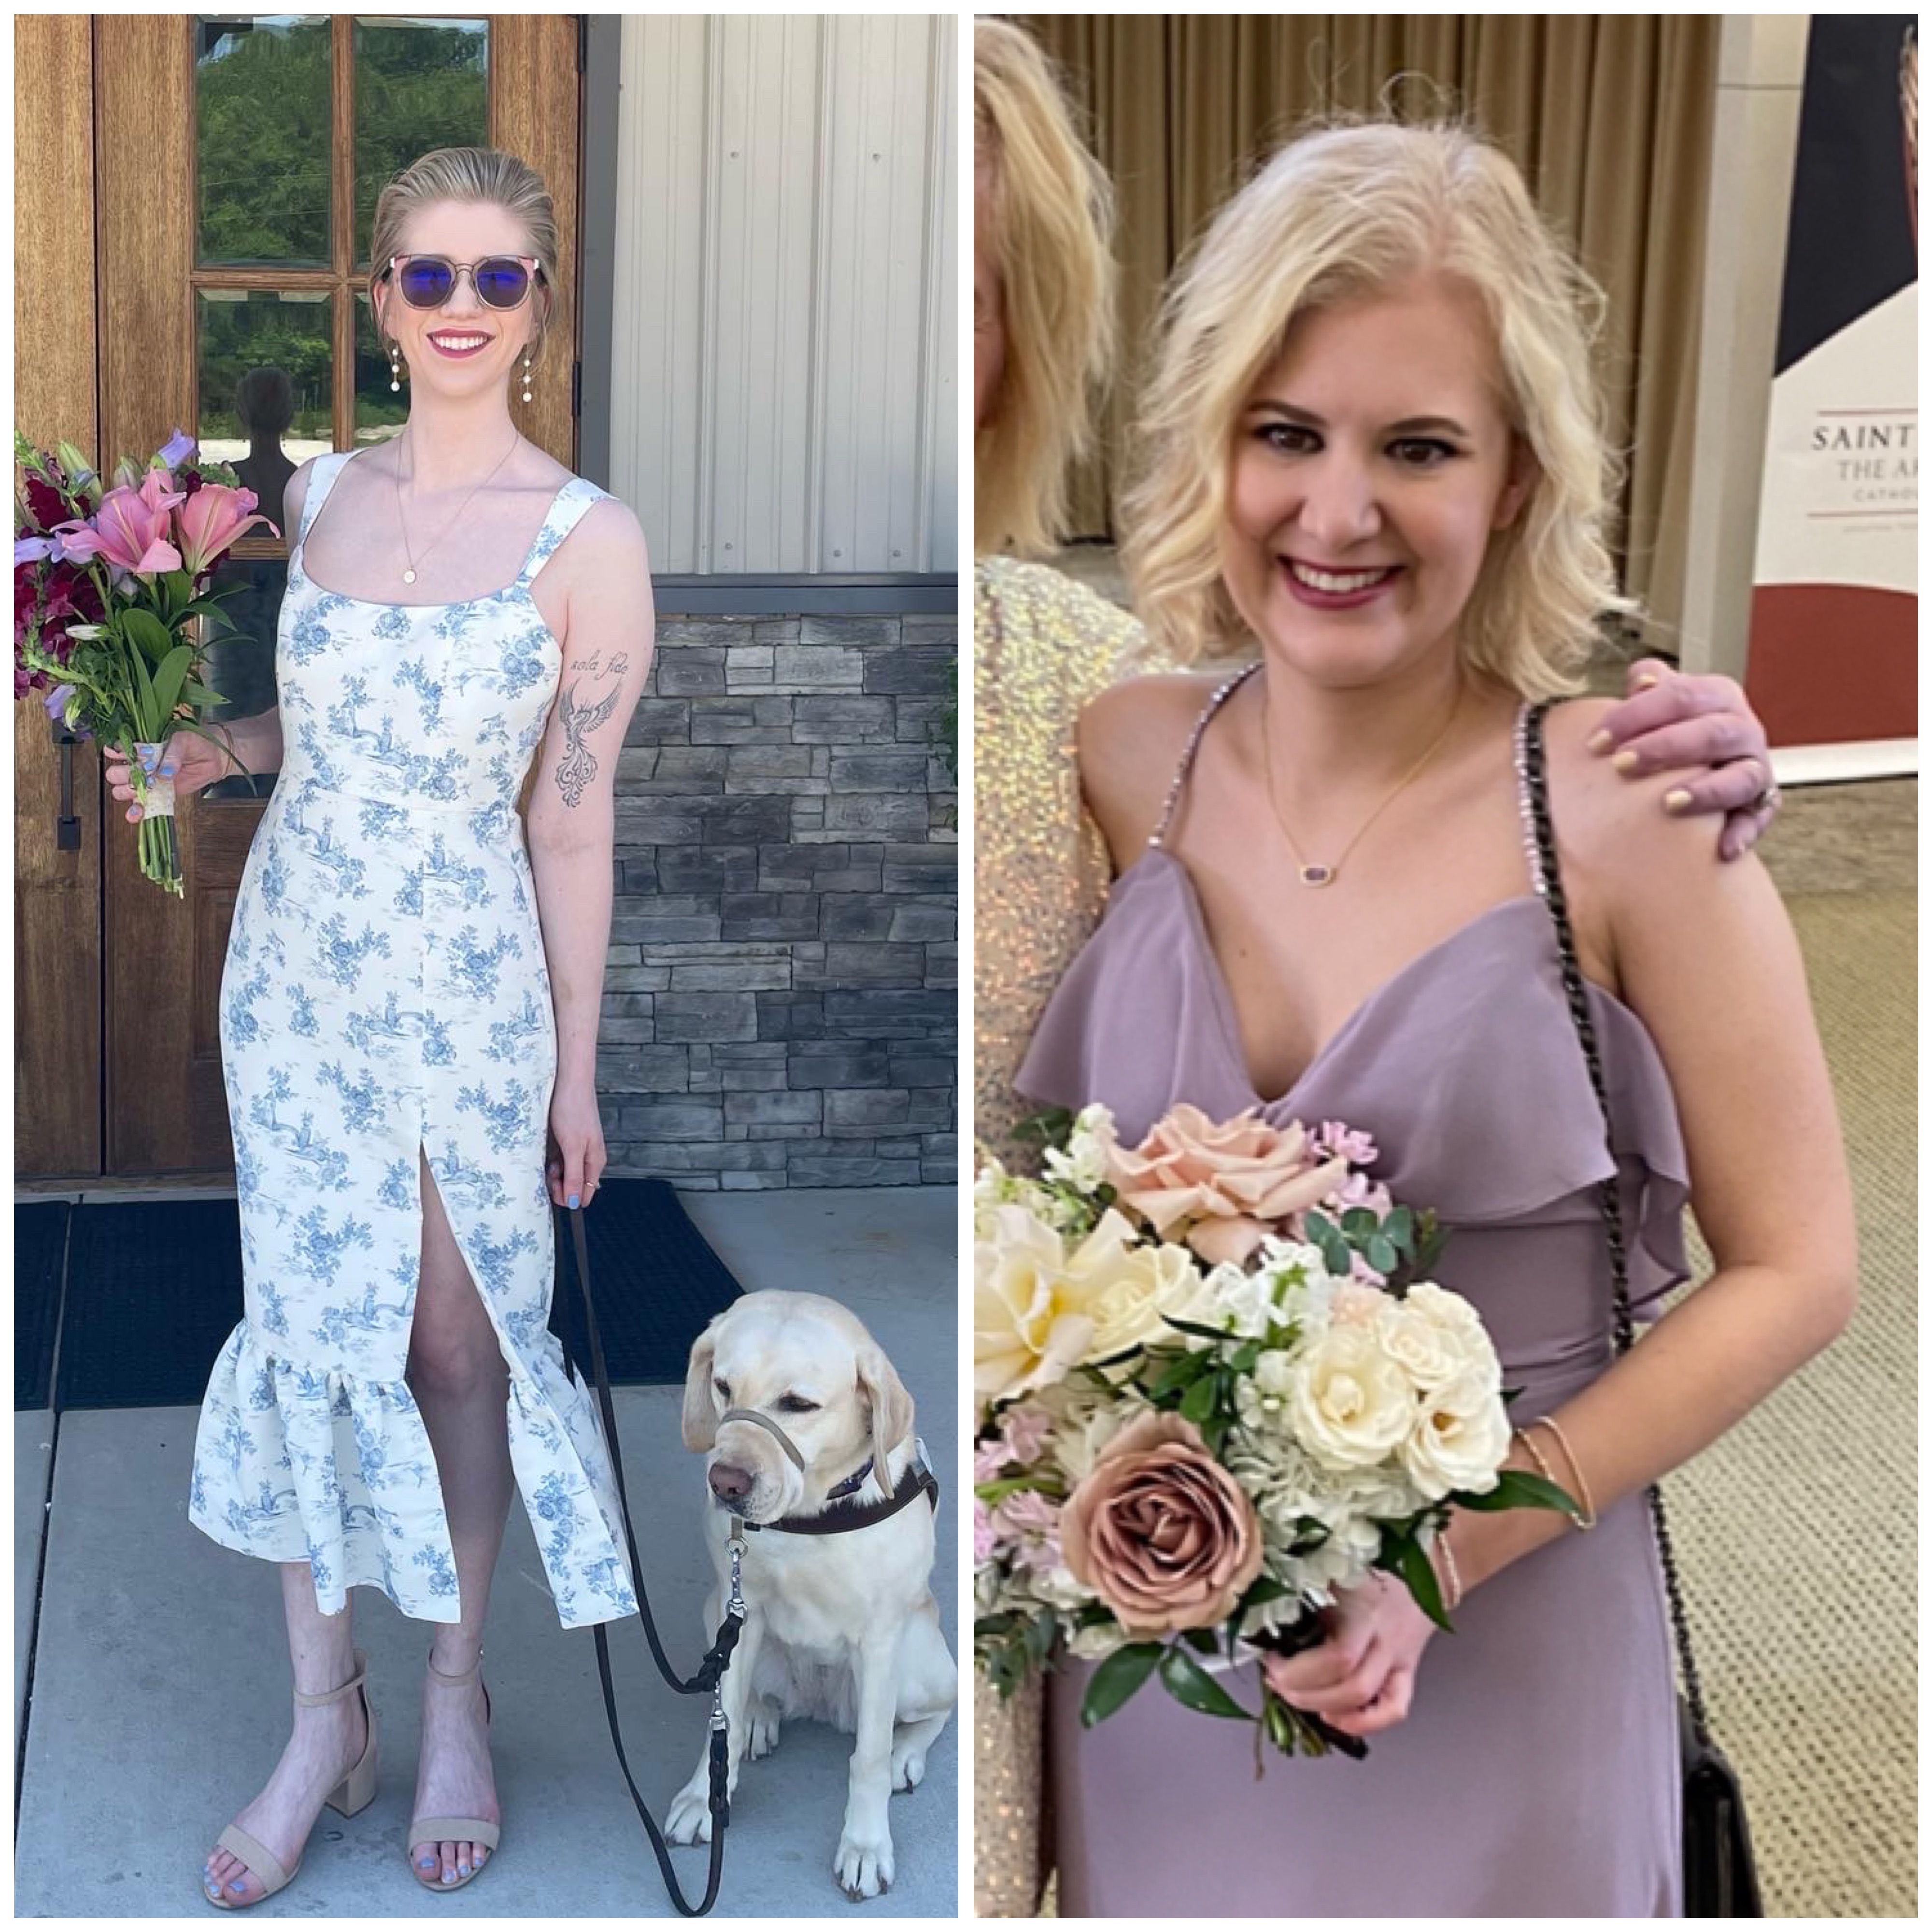 two photo collage of cass (left) and case (right) wearing bridesmaid gowns and holding bouquets. cass wears a tea-length white dress with a light blue pattern and a slit up the left leg. cass has her short hair pulled back and holds a multicolor bouquet. case wears a lavender gown with a v-neck ruffle on the bodice. case has her bob-length hair styled in curls and holds a white and pink bouquet 